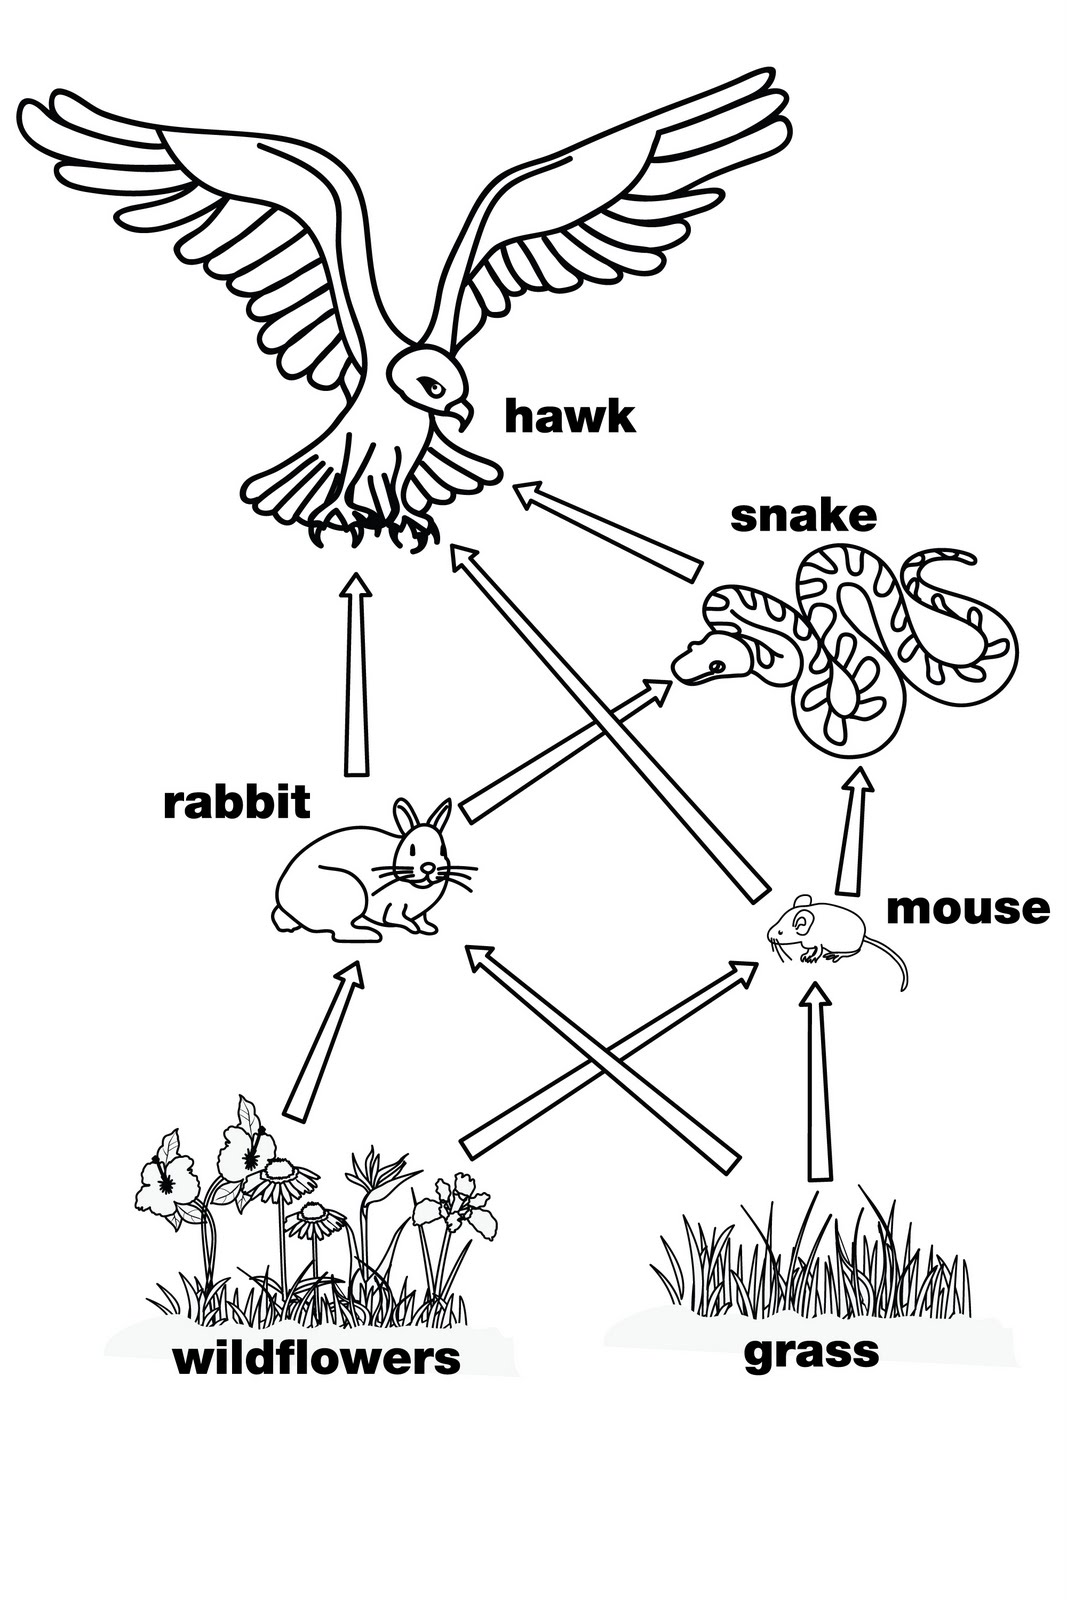 Food Chains And Webs Worksheet